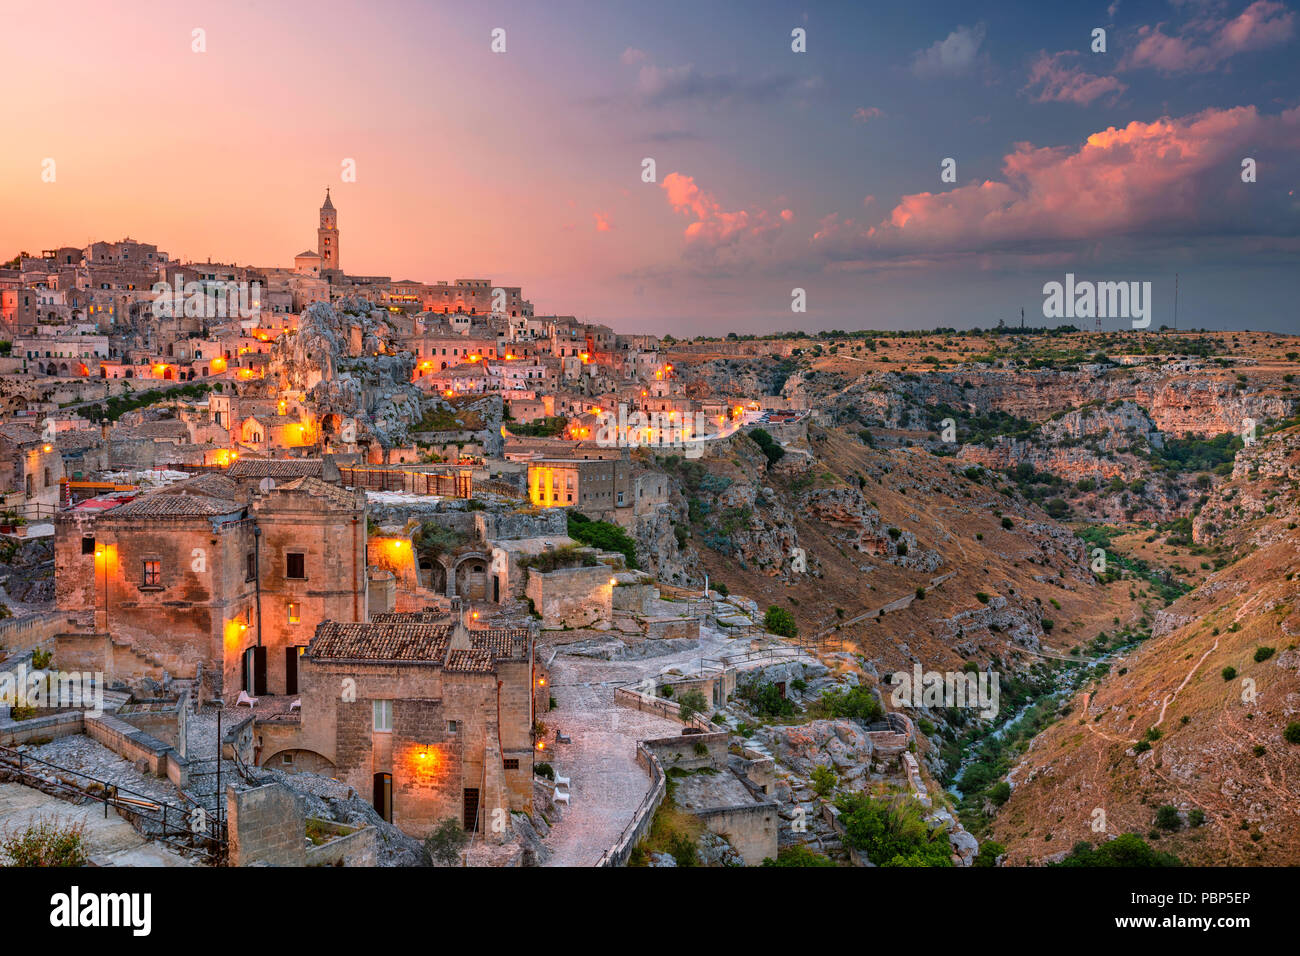 Matera, Italy. Cityscape aerial image of medieval city of Matera, Italy during beautiful sunset. Stock Photo